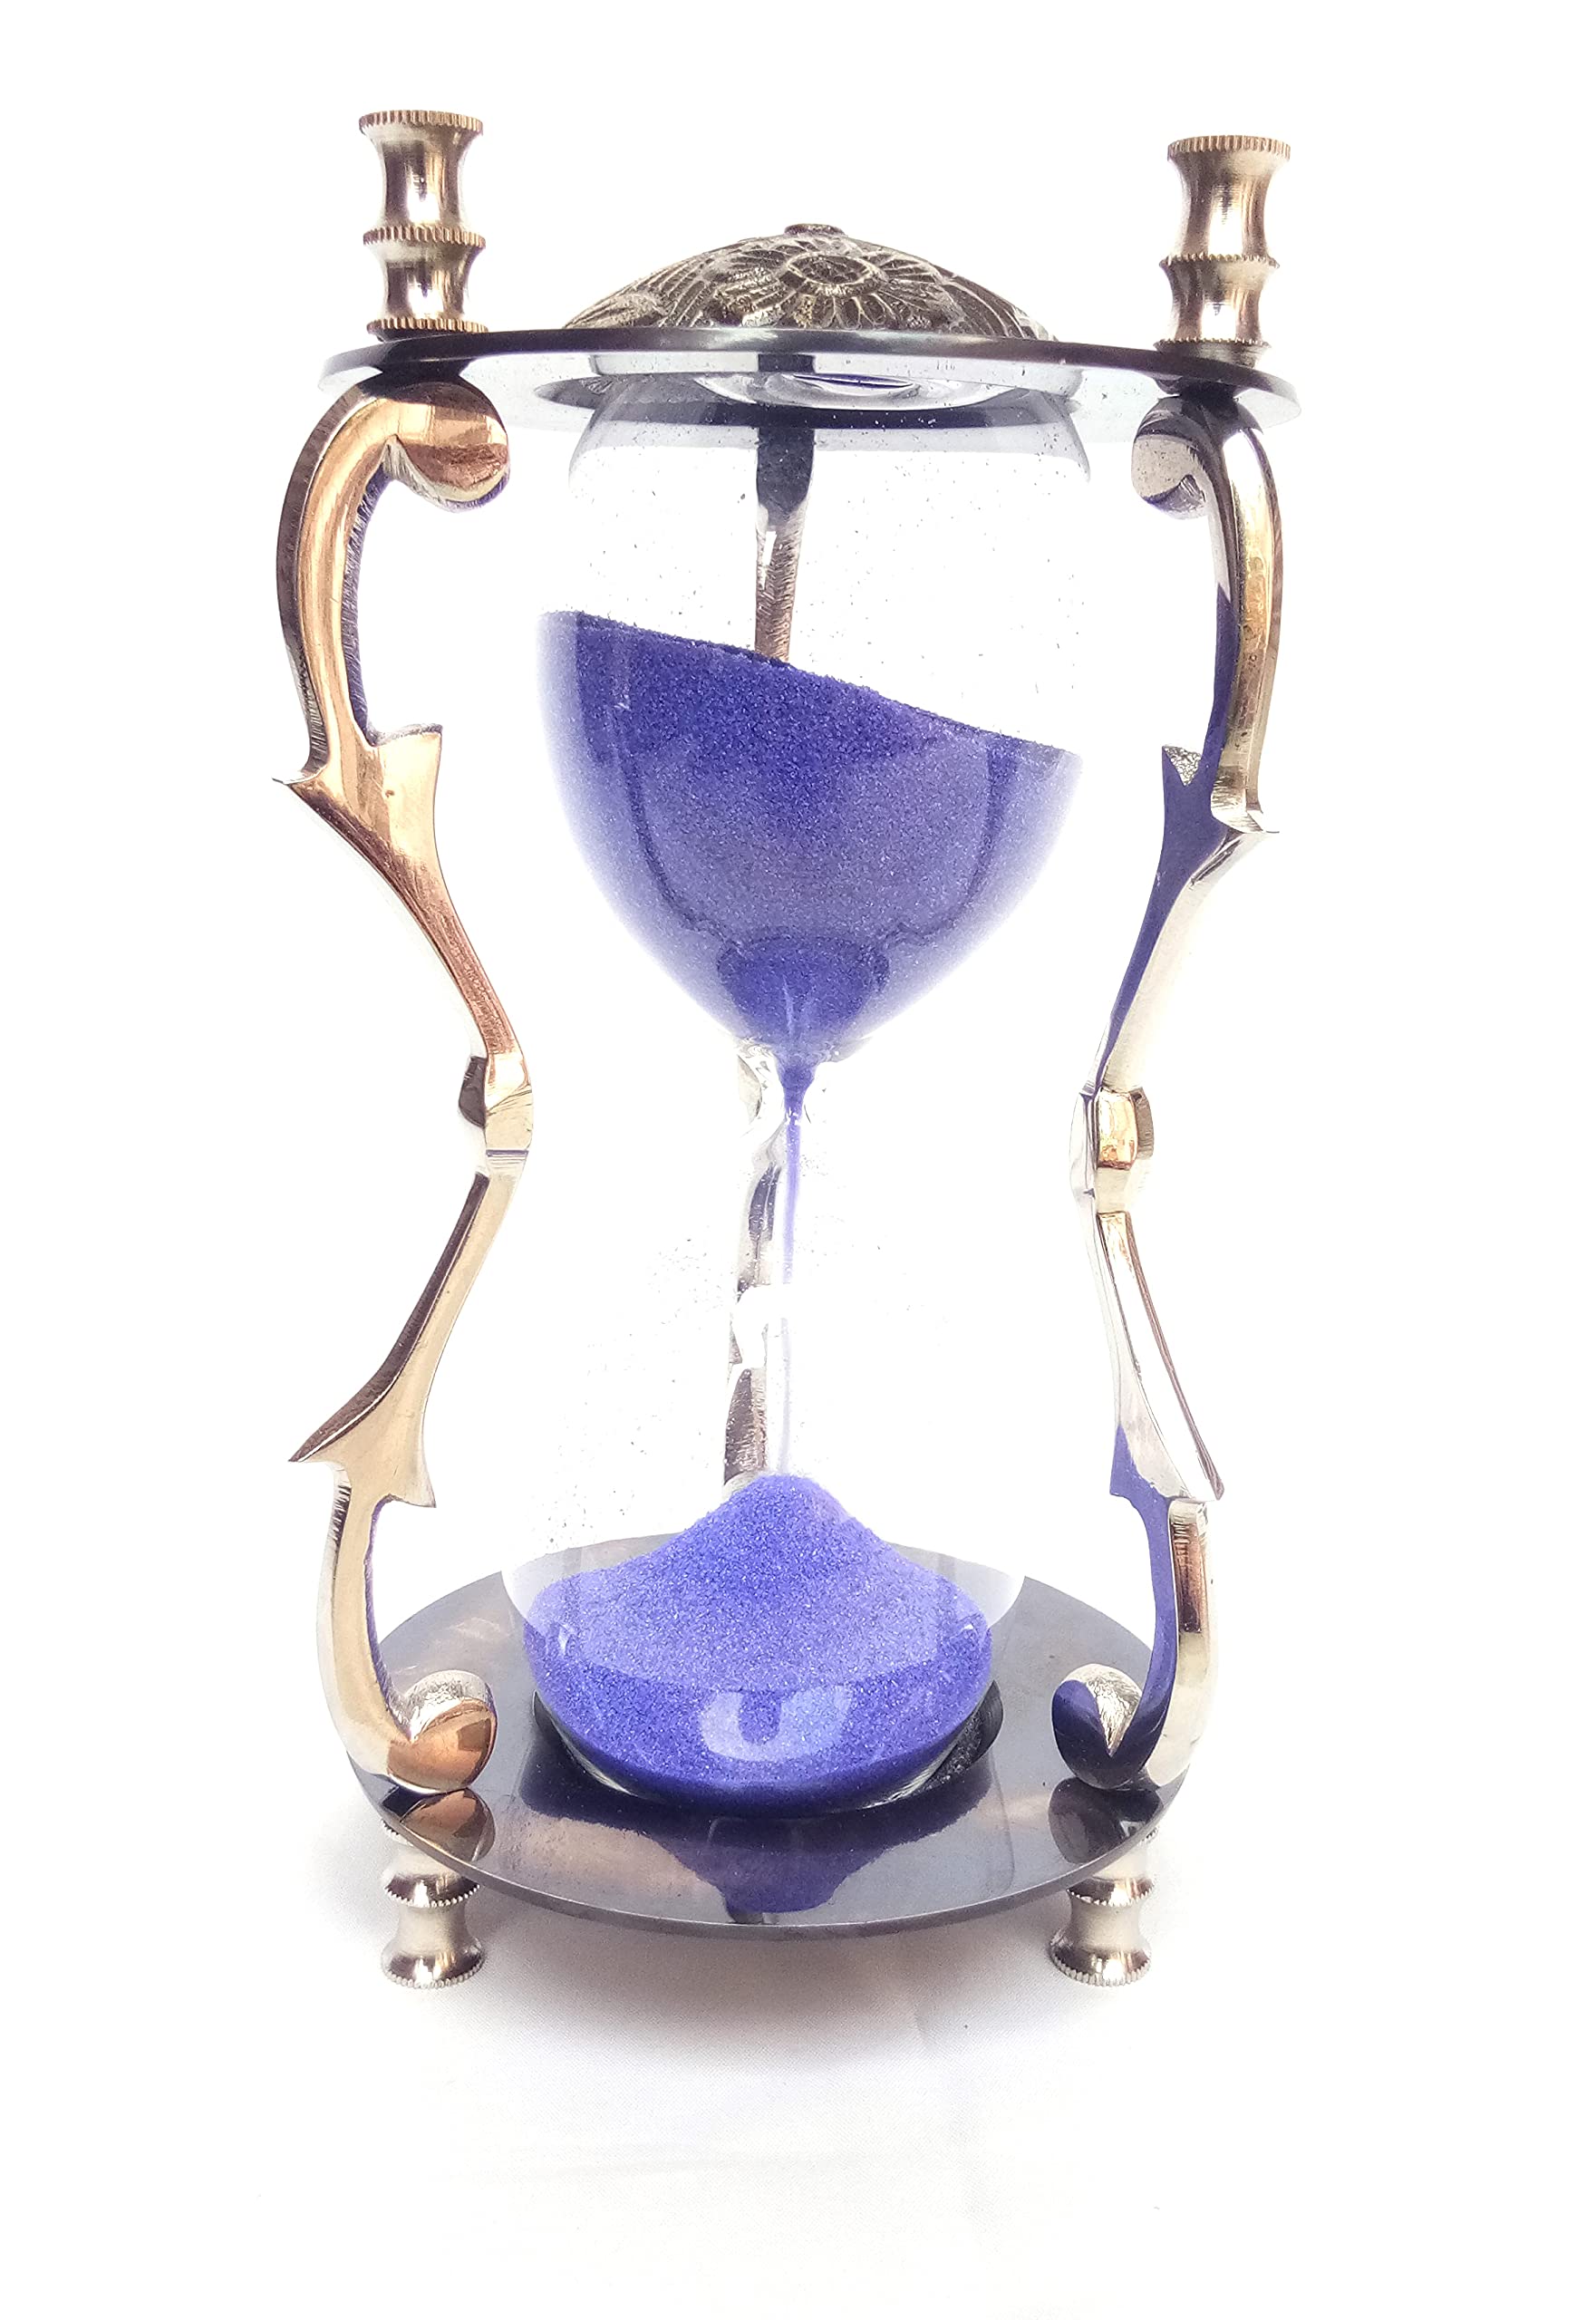 SIFAAT WORLD Antique & Nickel Decorative Hourglass Sandtimer with Purple Sand; Duration - 5 Minutes , Unique Vintage Black Metal Art Hourglass for Office Desk, Home Decor,Birthday Gift,etc.